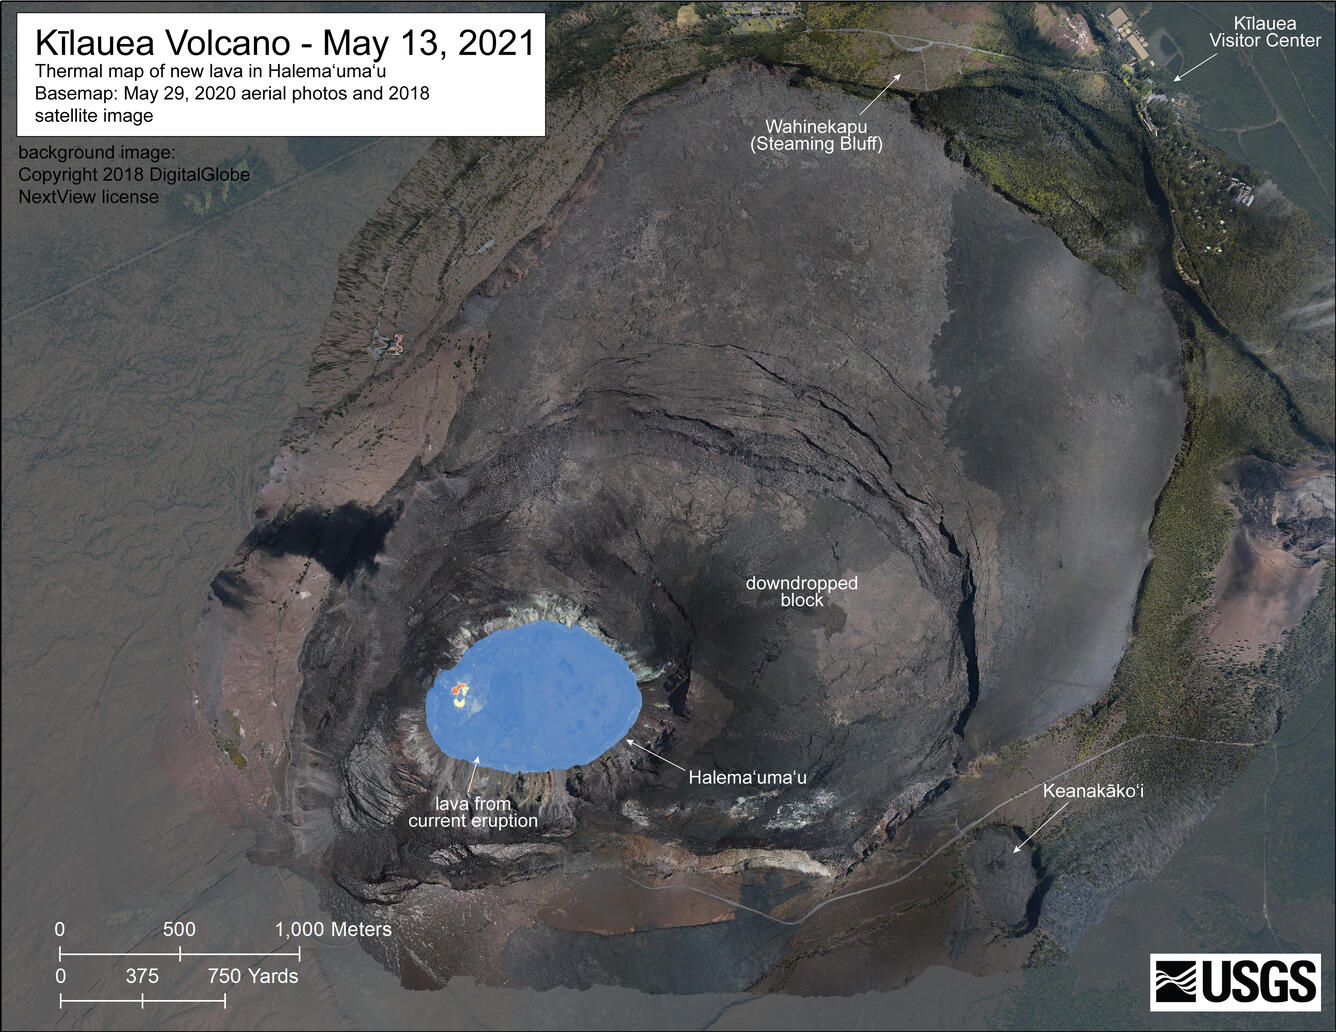 May 13, 2021—Kīlauea summit eruption thermal map constructed from aerial imagery